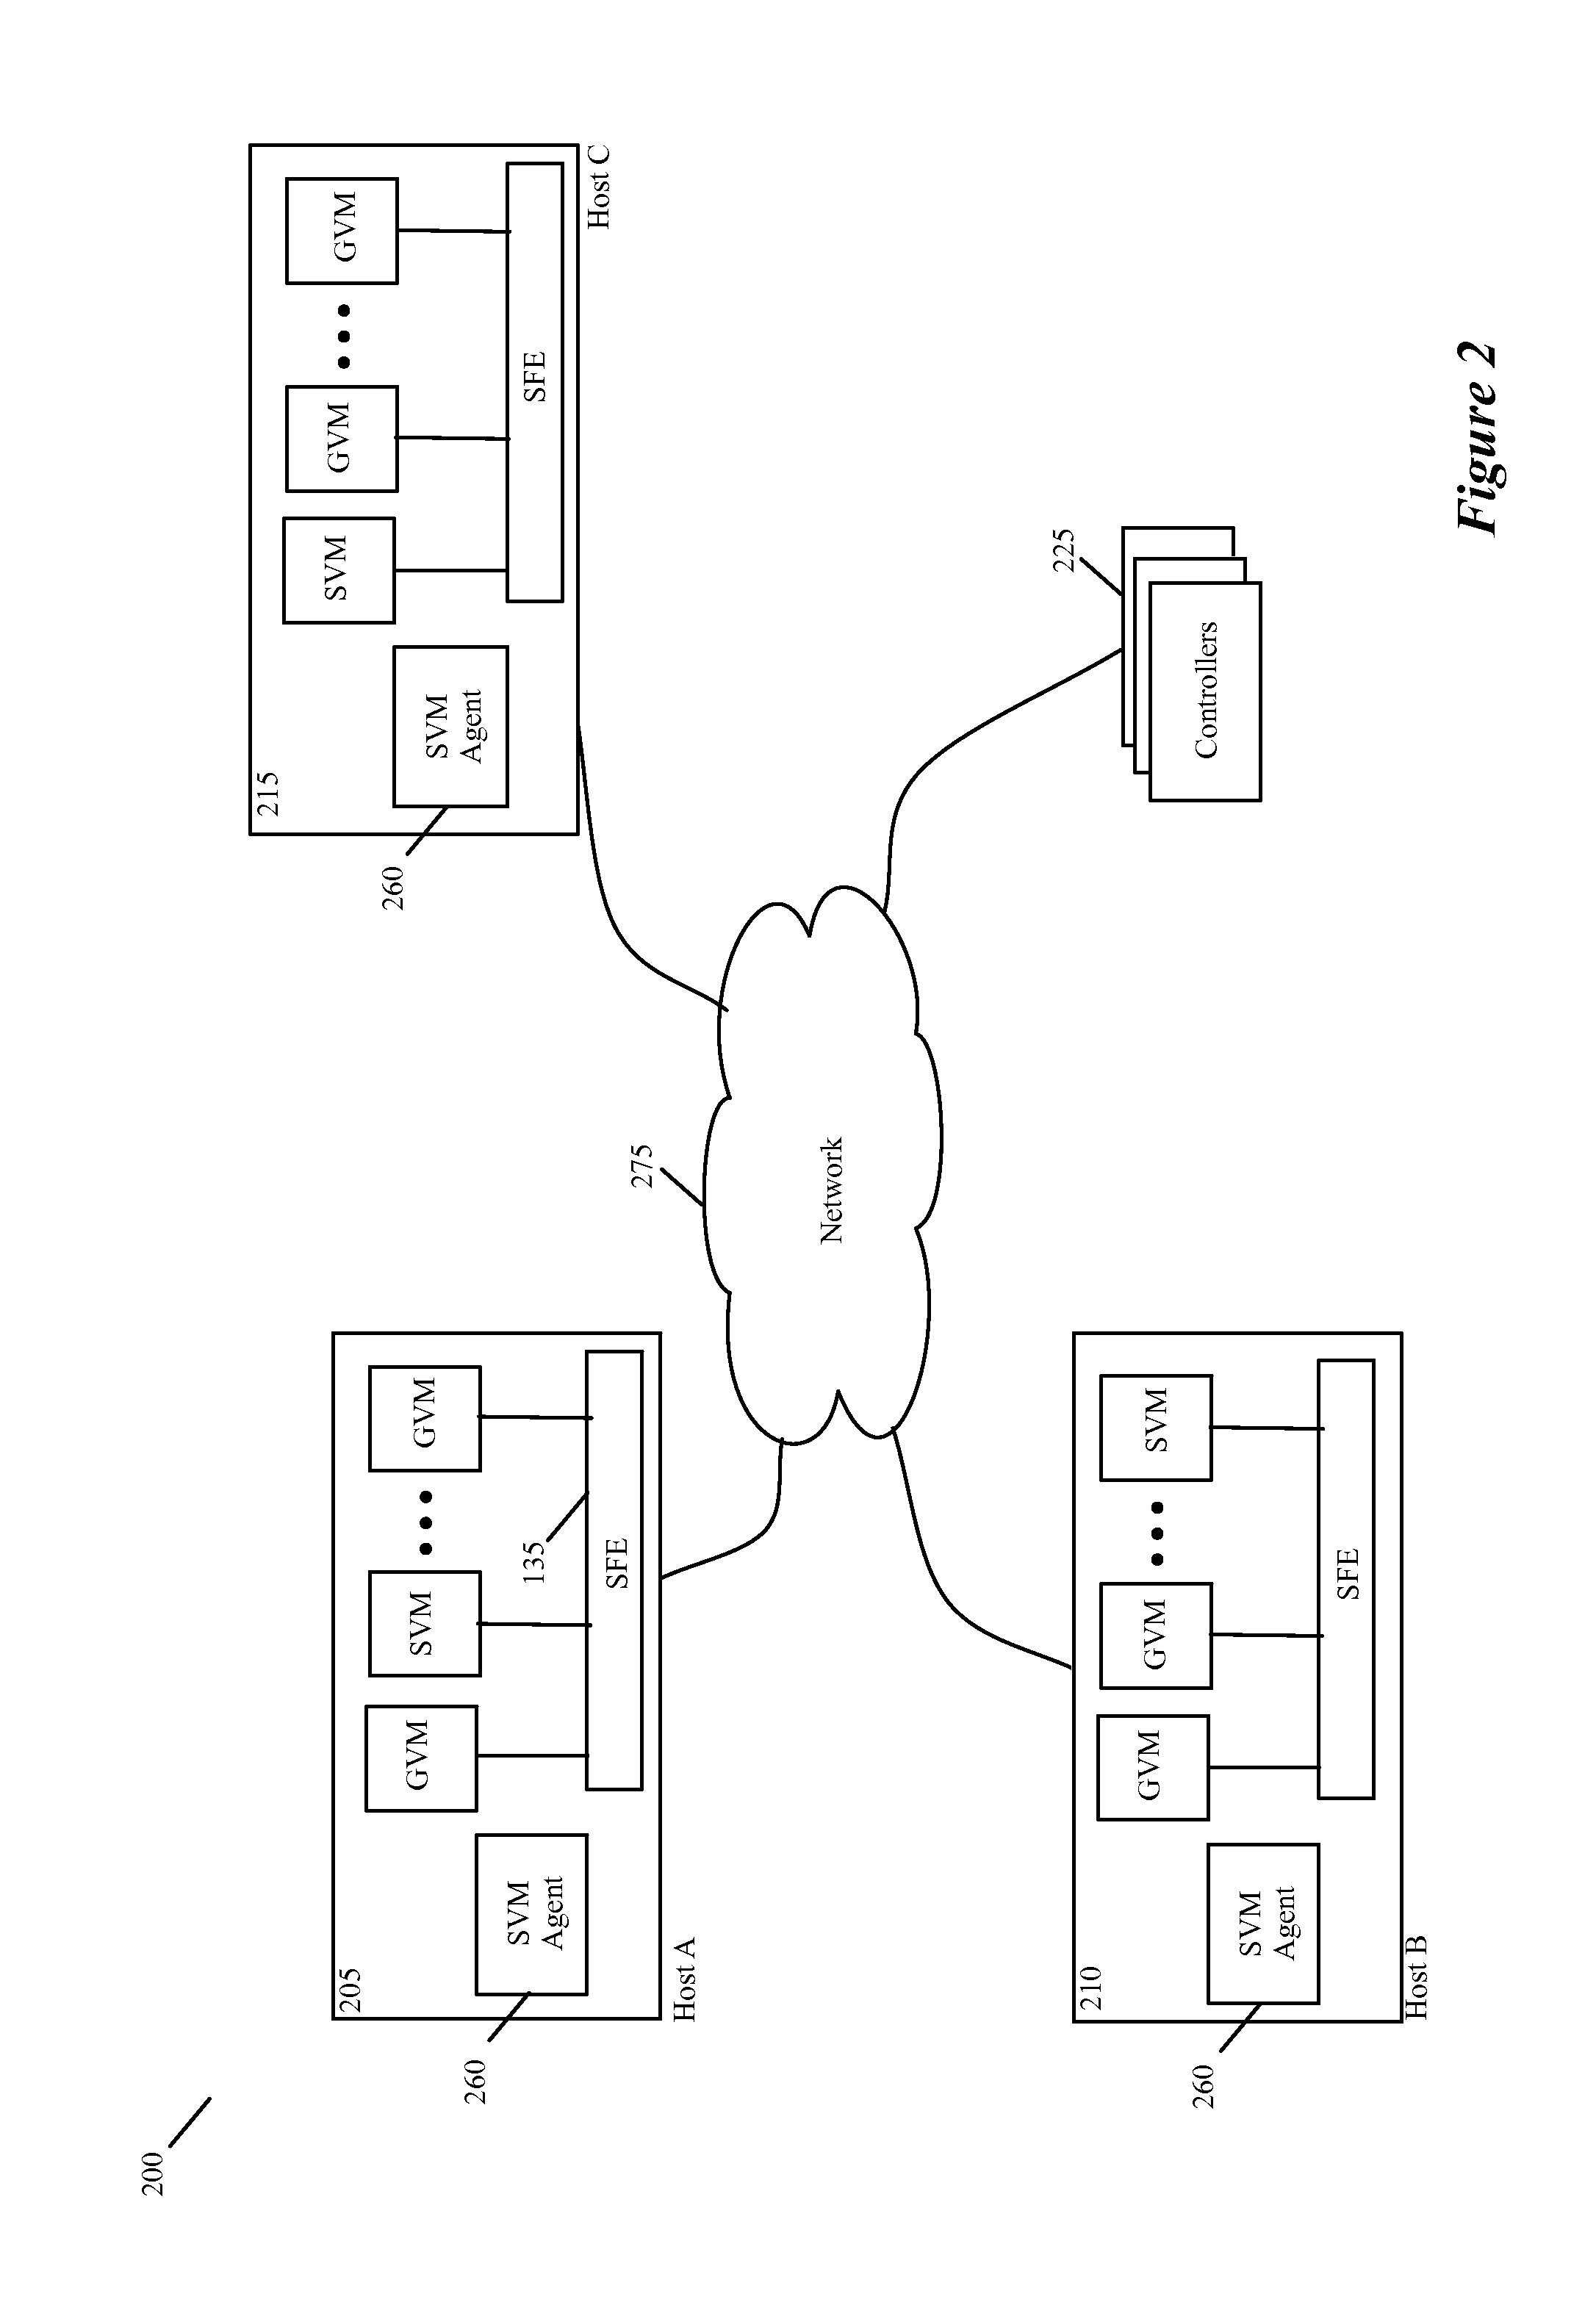 Method and apparatus for providing a service with a plurality of service nodes